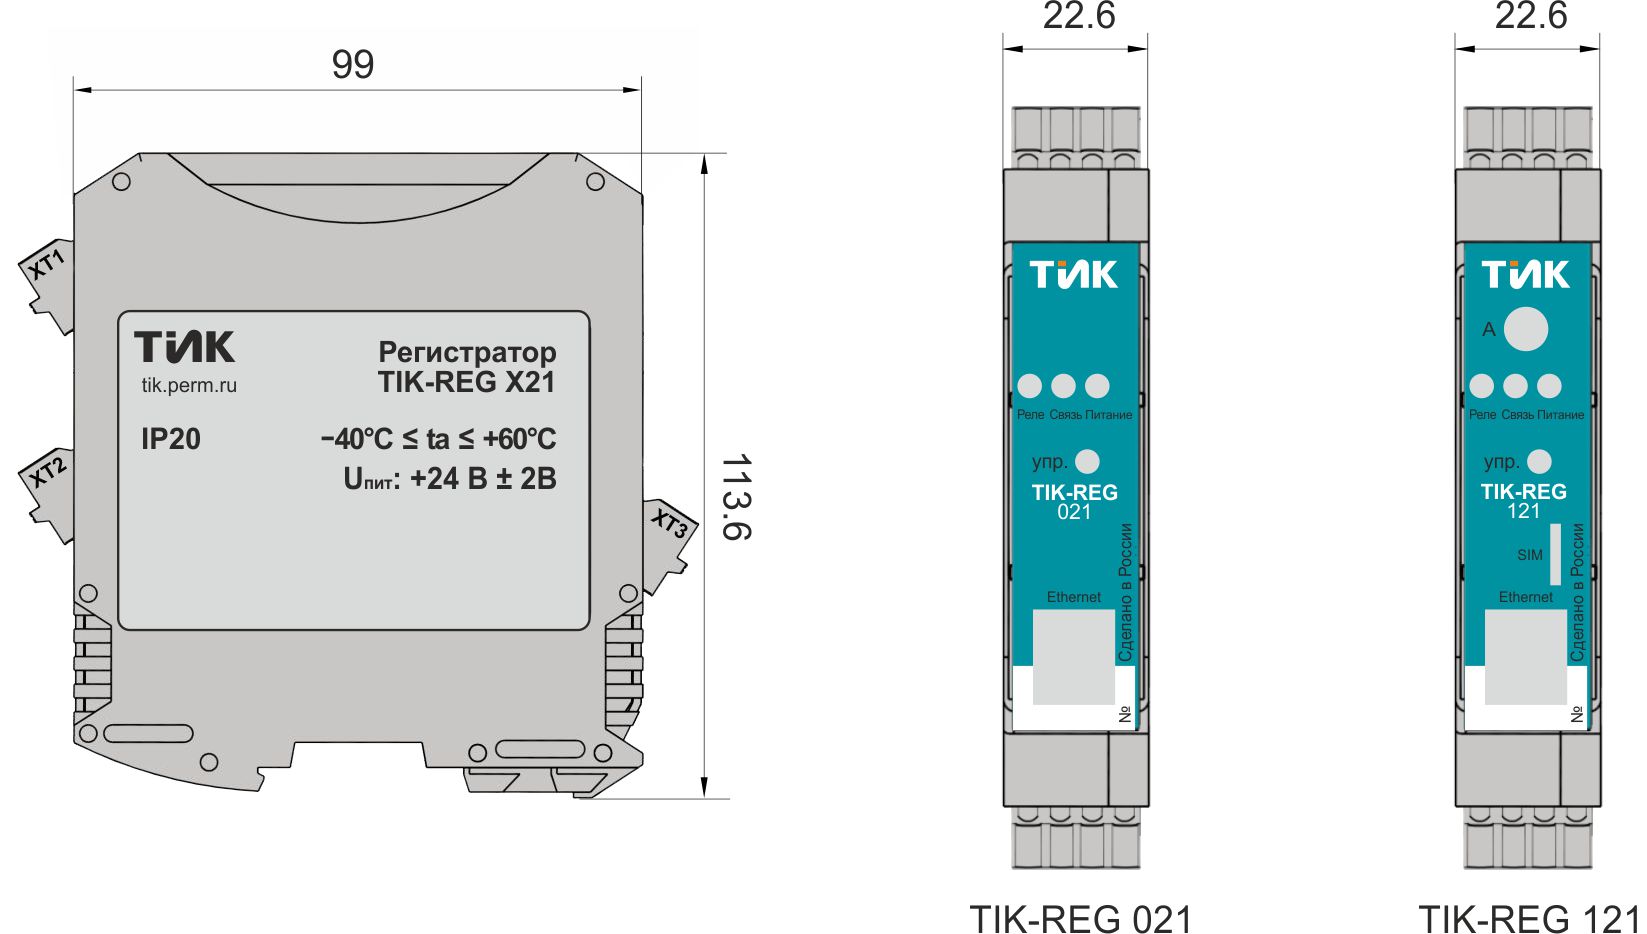 General view, overall and installation dimensions of TIK-REG recorder